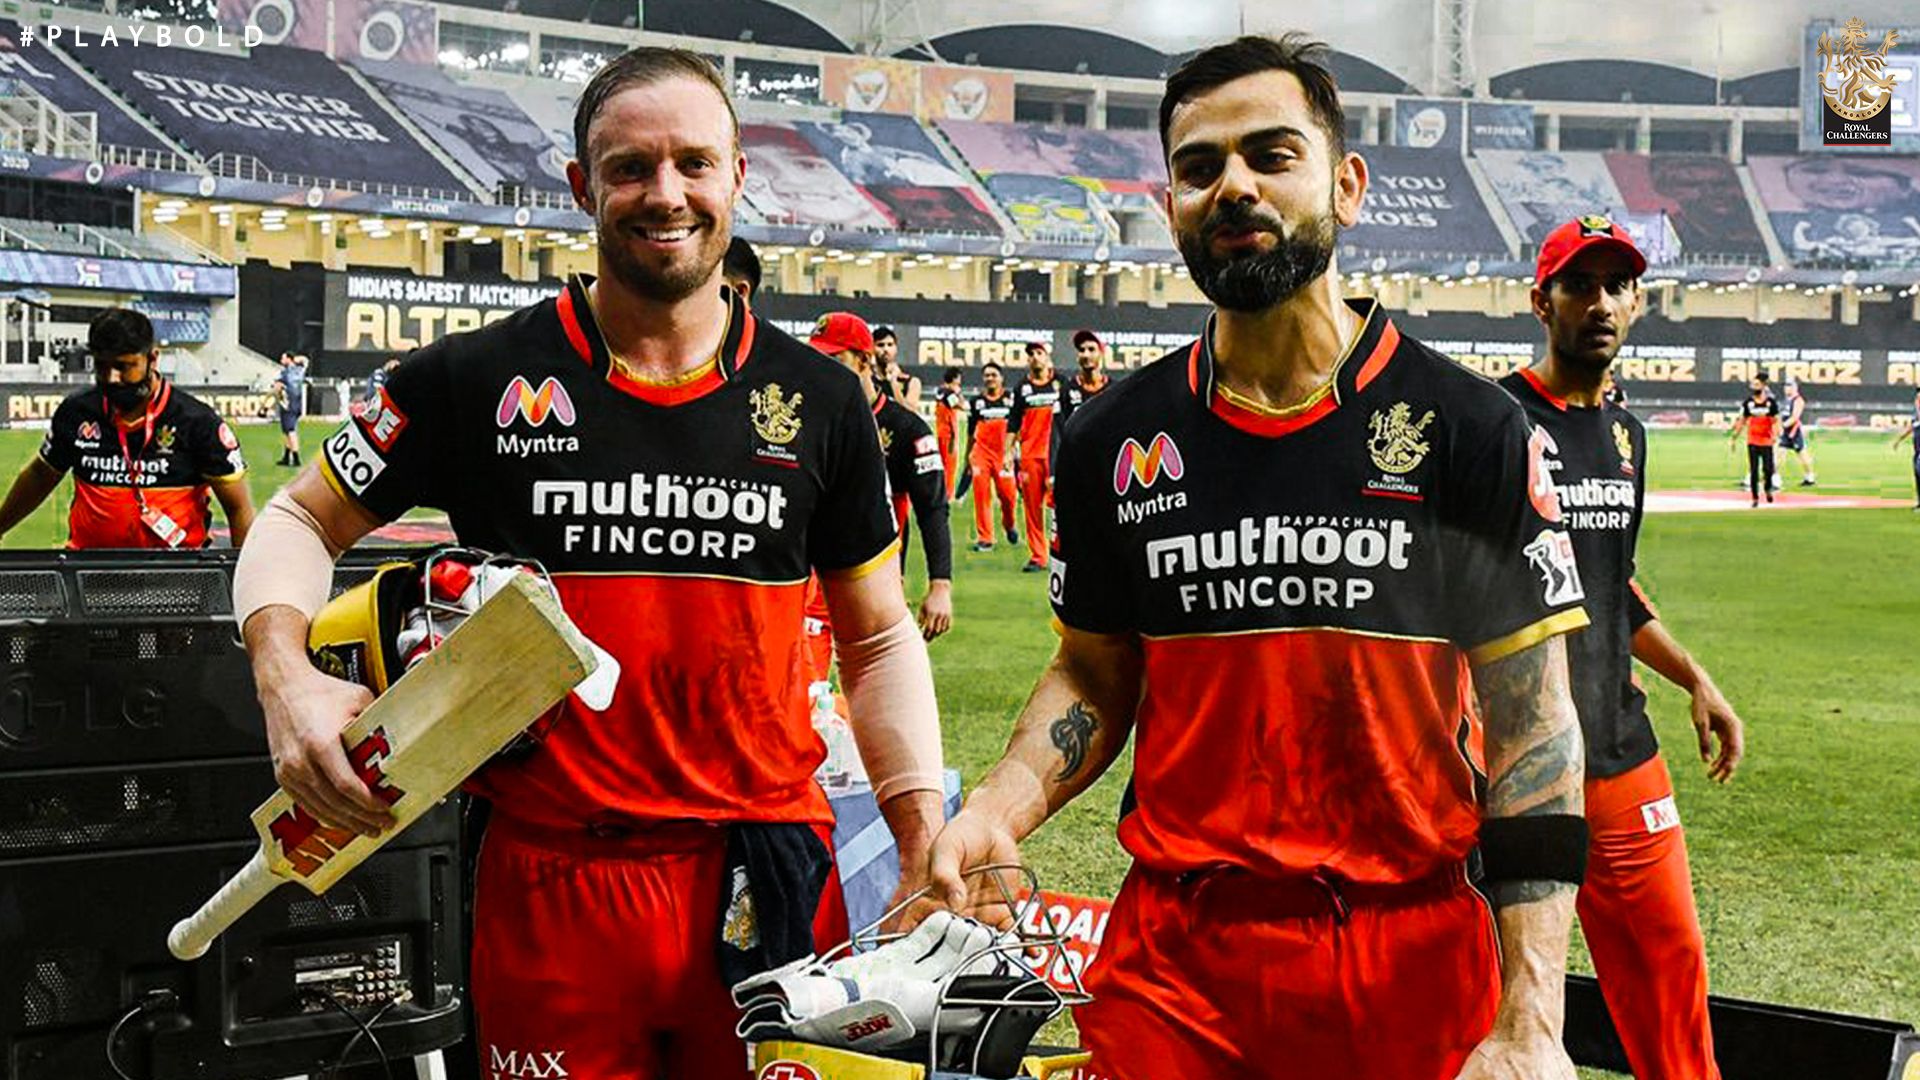 IPL 2021 Auction Royal Challengers Bangalore: Full List of Players RCB Bought, Complete Squad